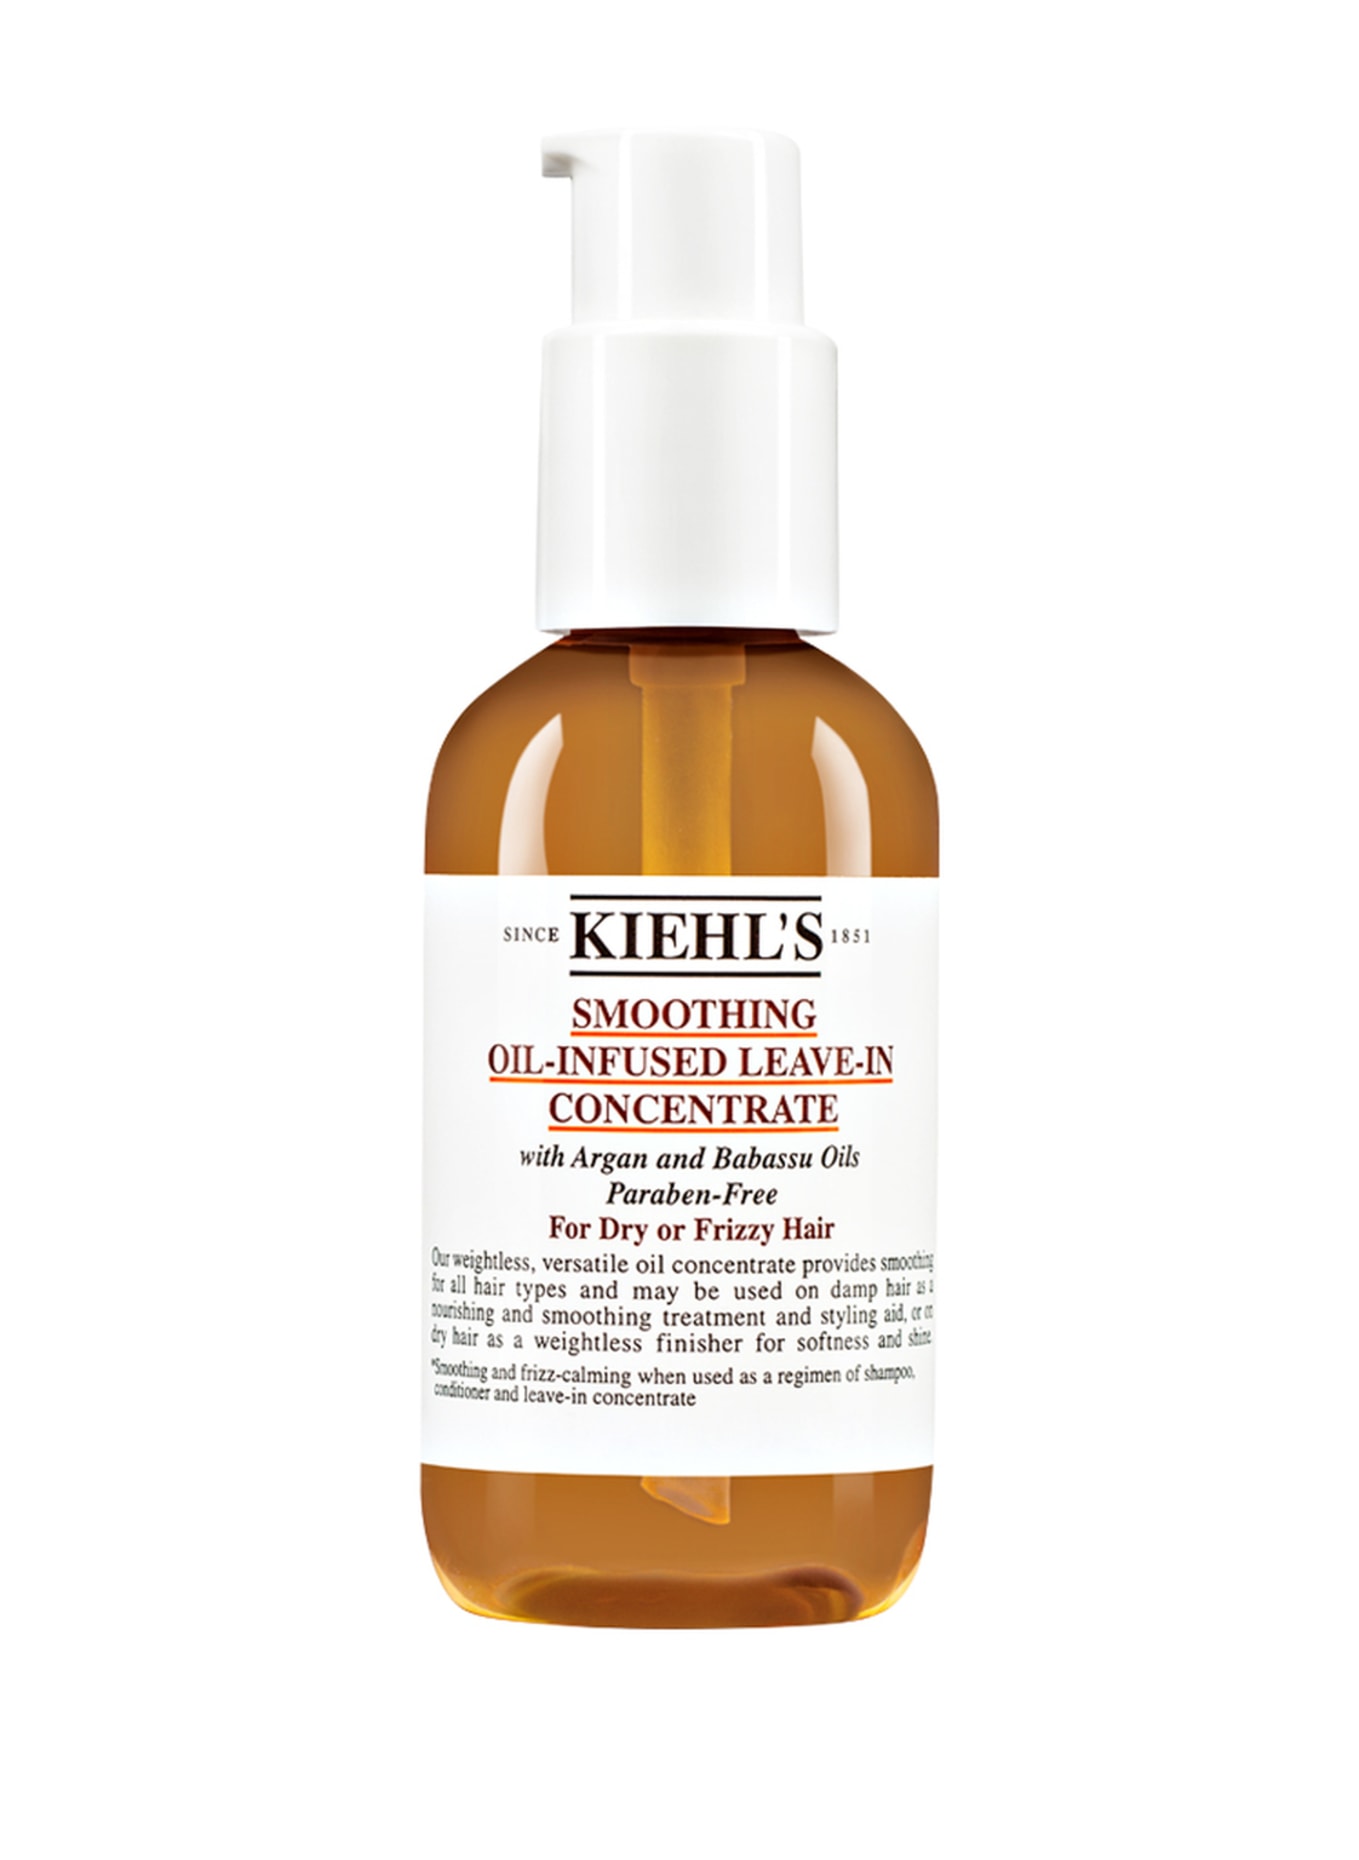 Kiehl's SMOOTHING OIL-INFUSED LEAVE-IN CONCENTRATE (Obrazek 1)